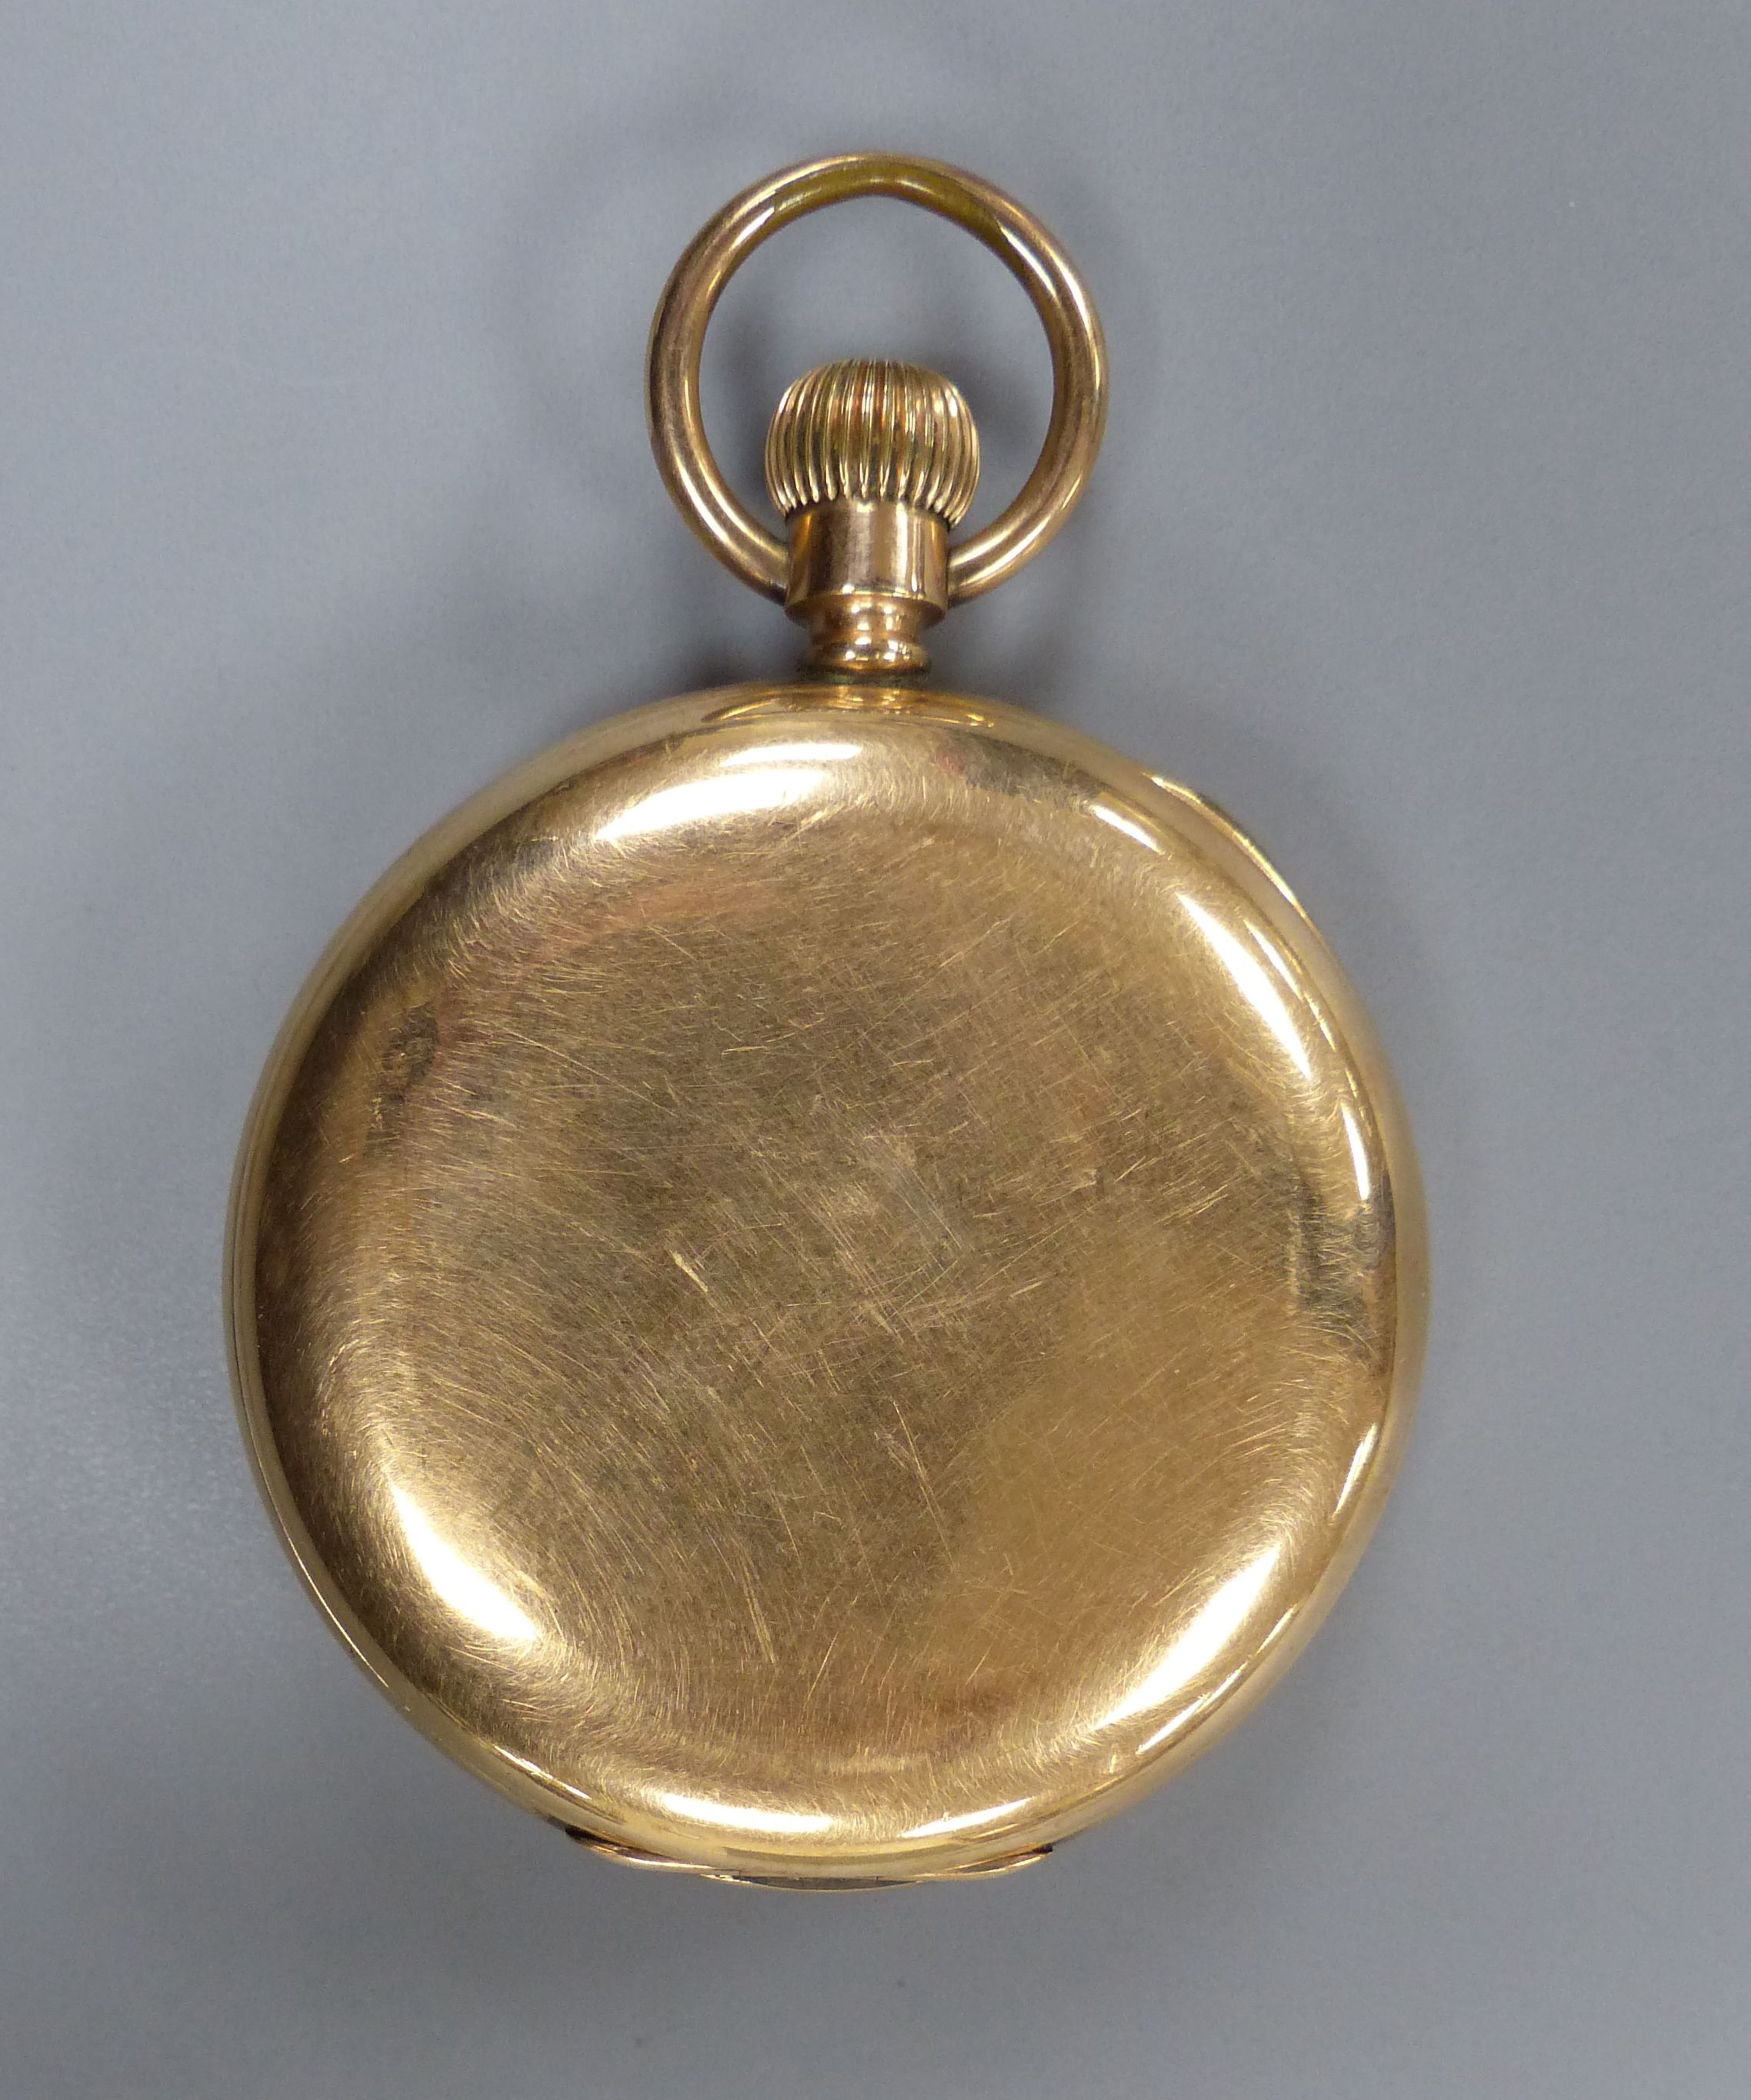 A gold plated half hunter pocket watch and a 375 and cultured pearl set tie pin, 55mm.